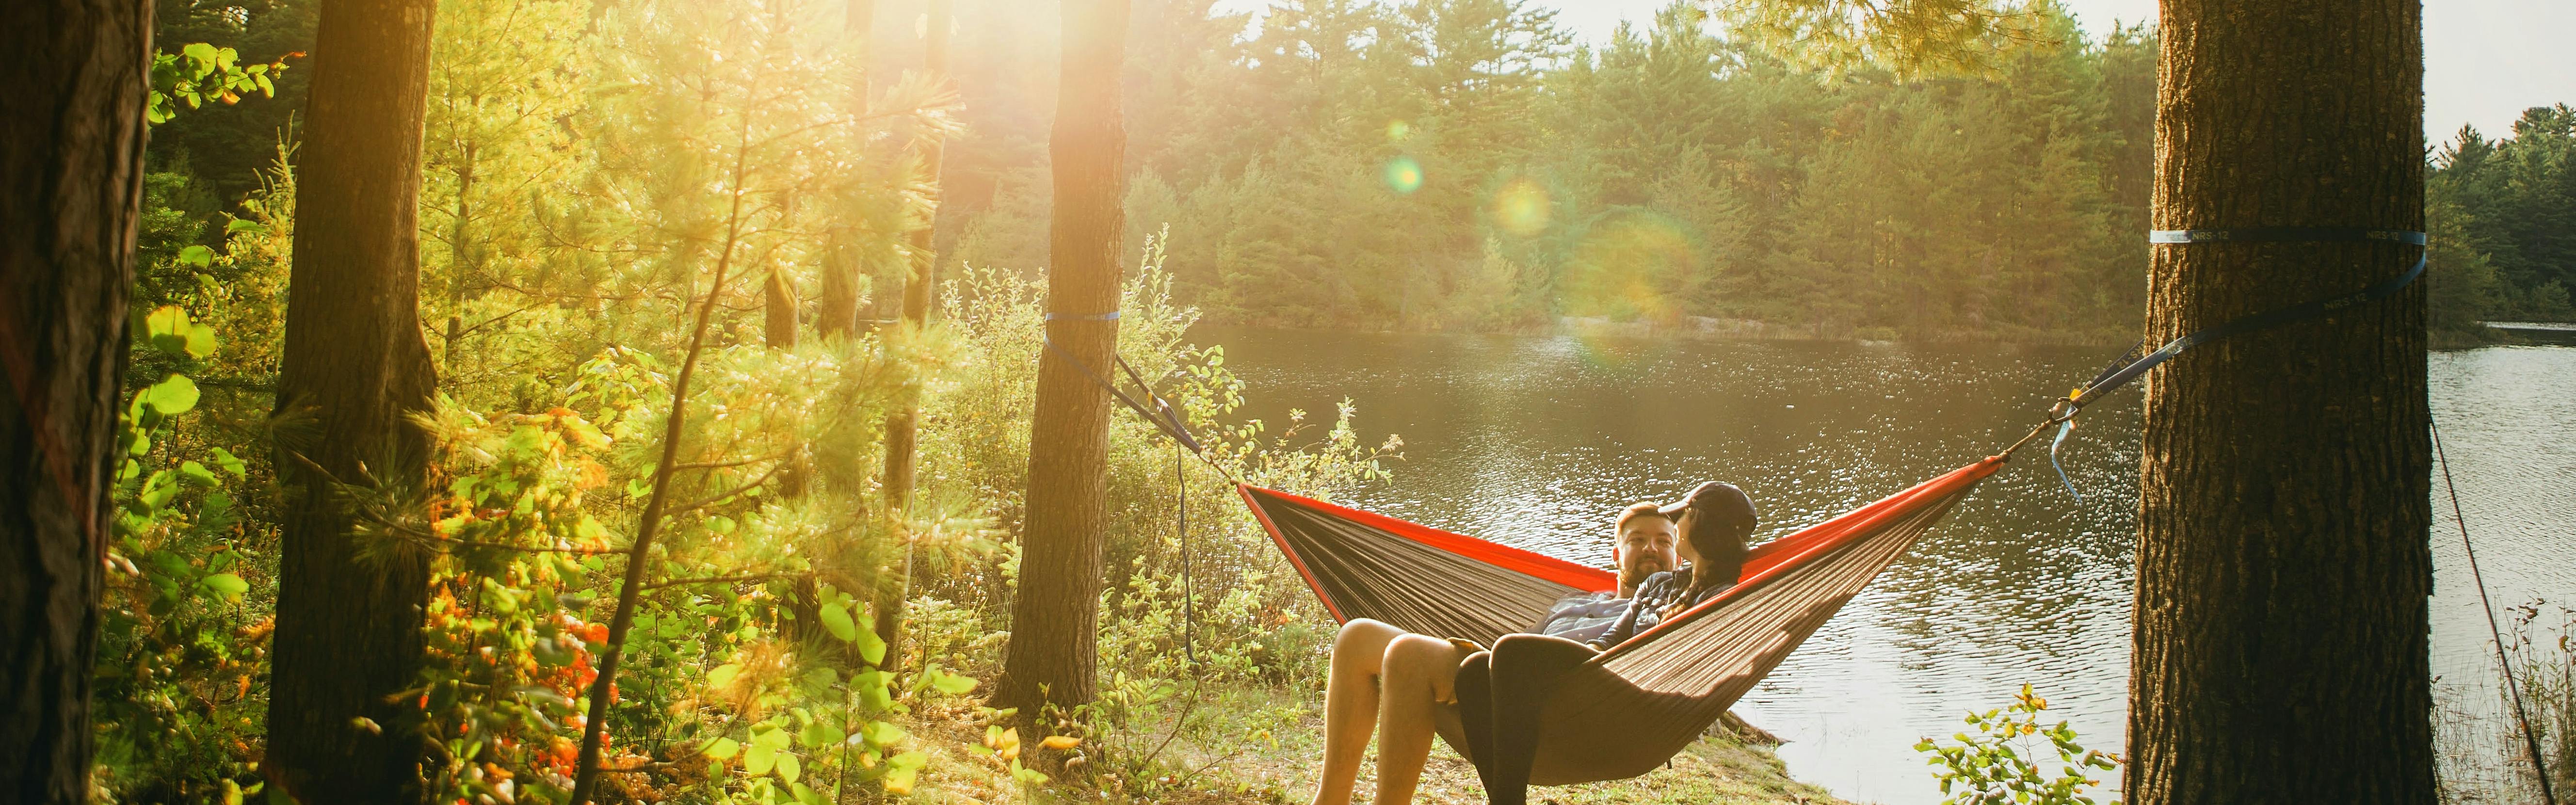 Two people sit in a hammock next to a lake. The hammock is set up between two conifers. The sun filters through the foliage.